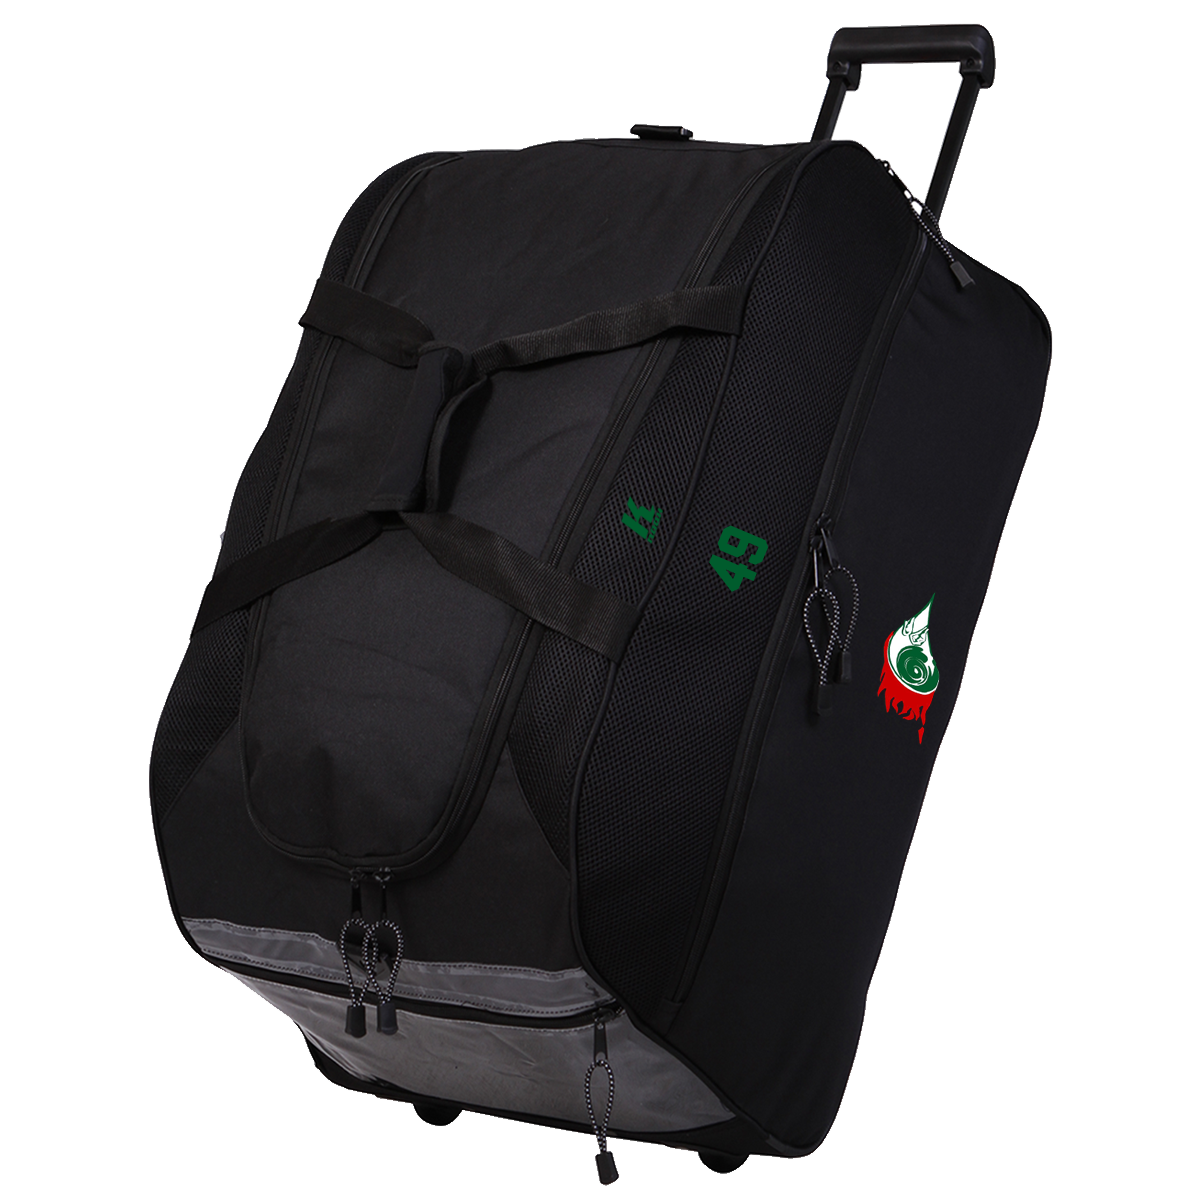 X-Press Wheelie Team Kitbag with Playernumber or Initials